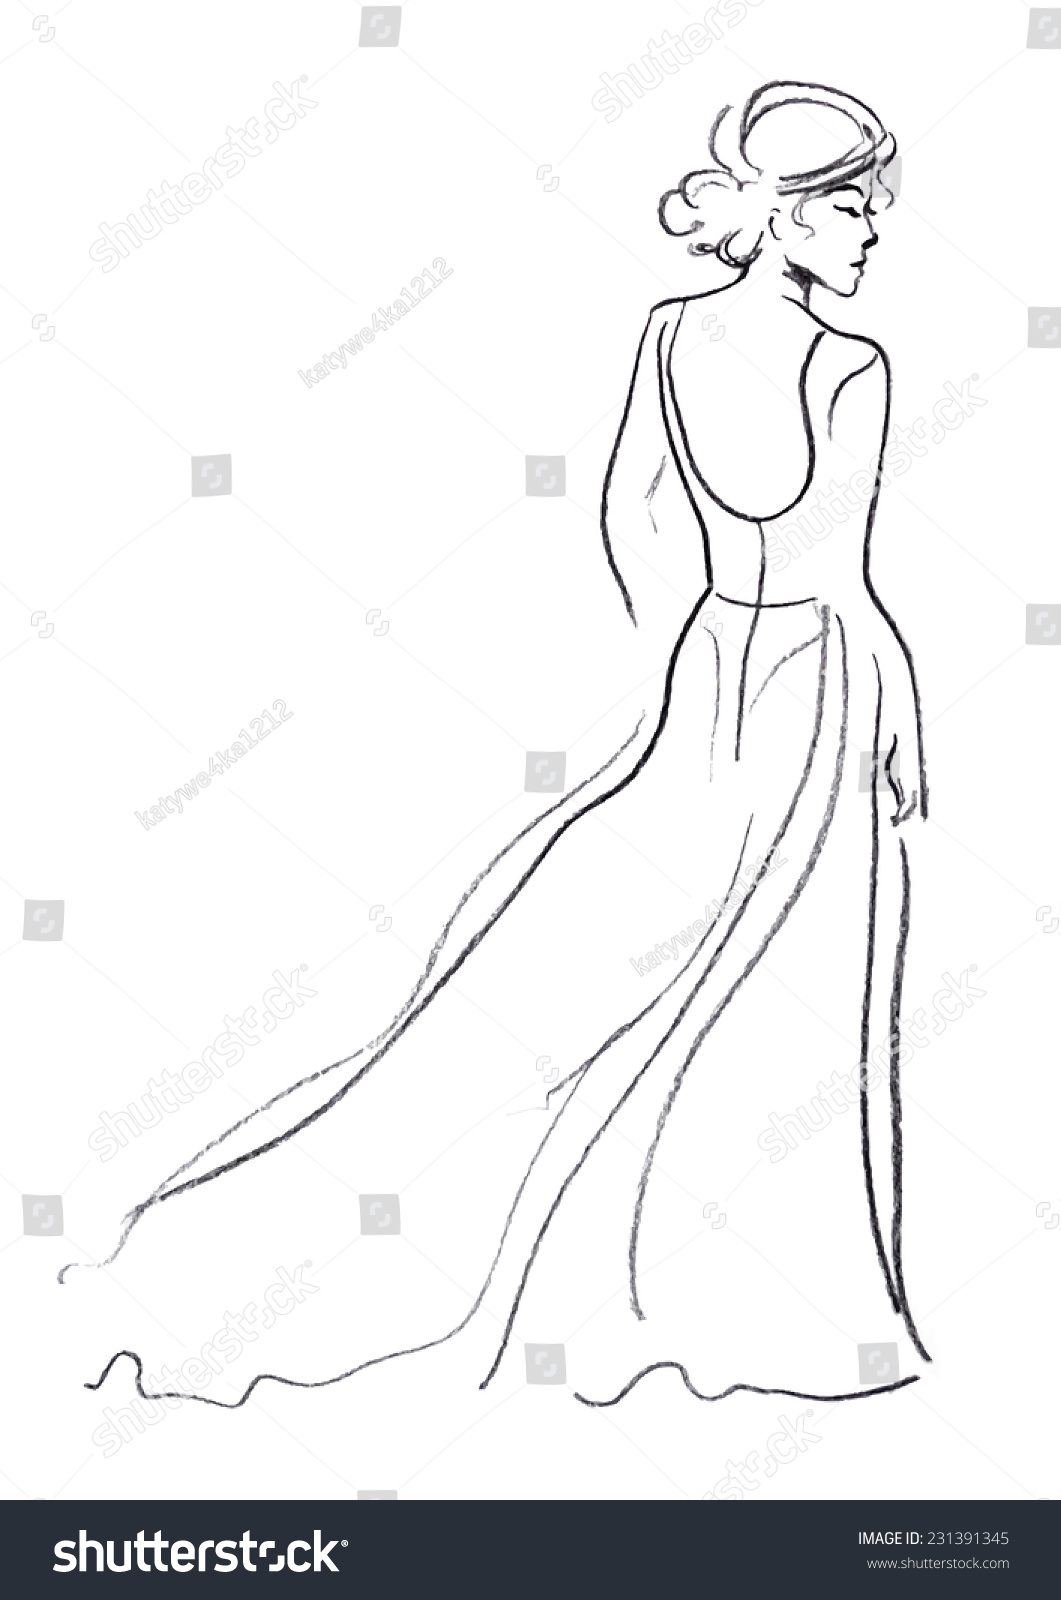 Design Sketch With A Female In A Long Dress Standing Back. Bride. Stock ...